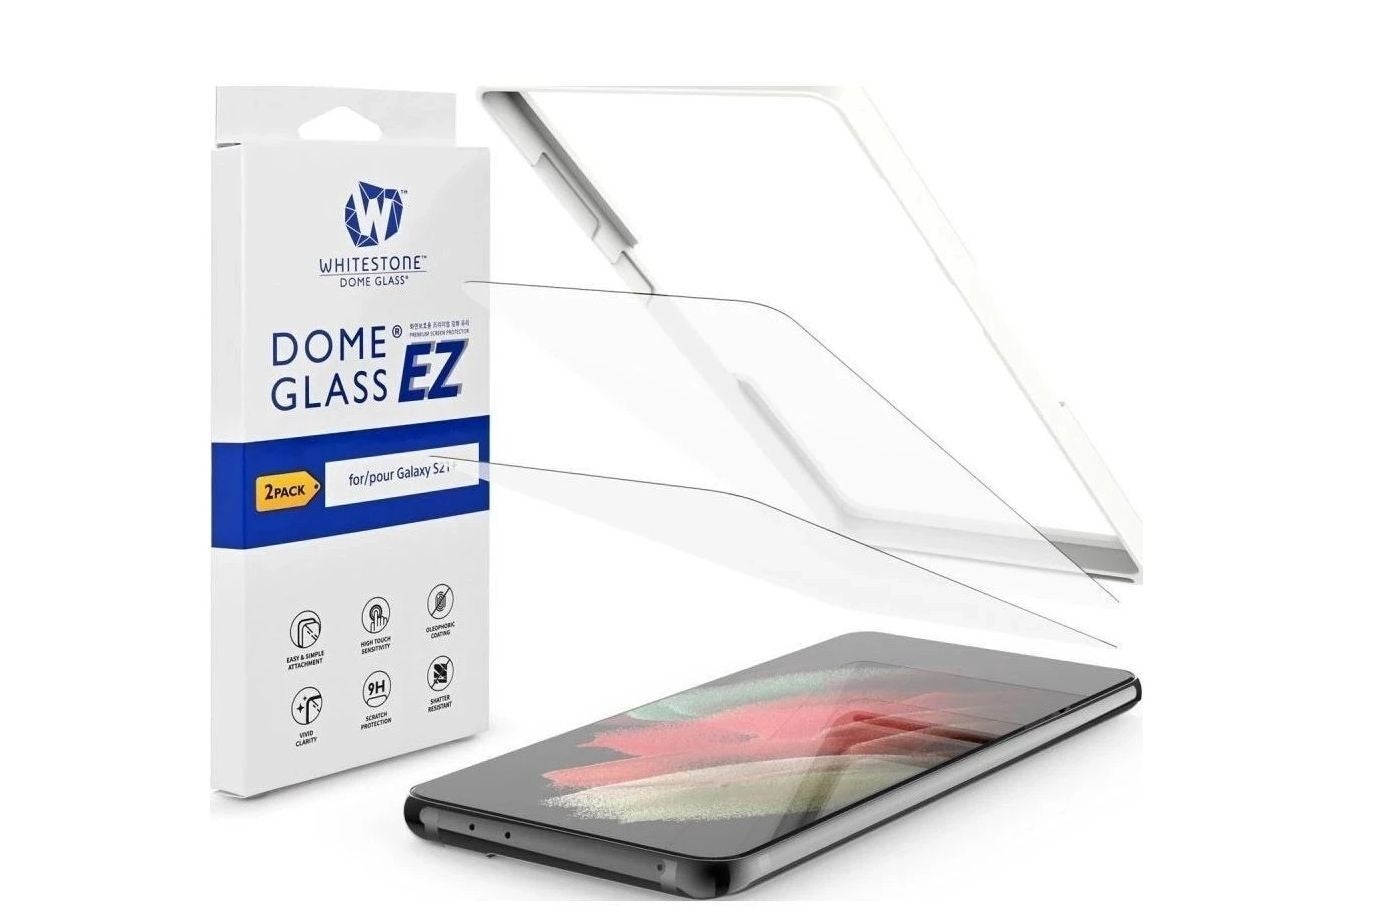 Whitestone Dome Glass Galaxy S22 Plus screen protector - Best Samsung Galaxy S22 Plus screen protectors - get some protection now!